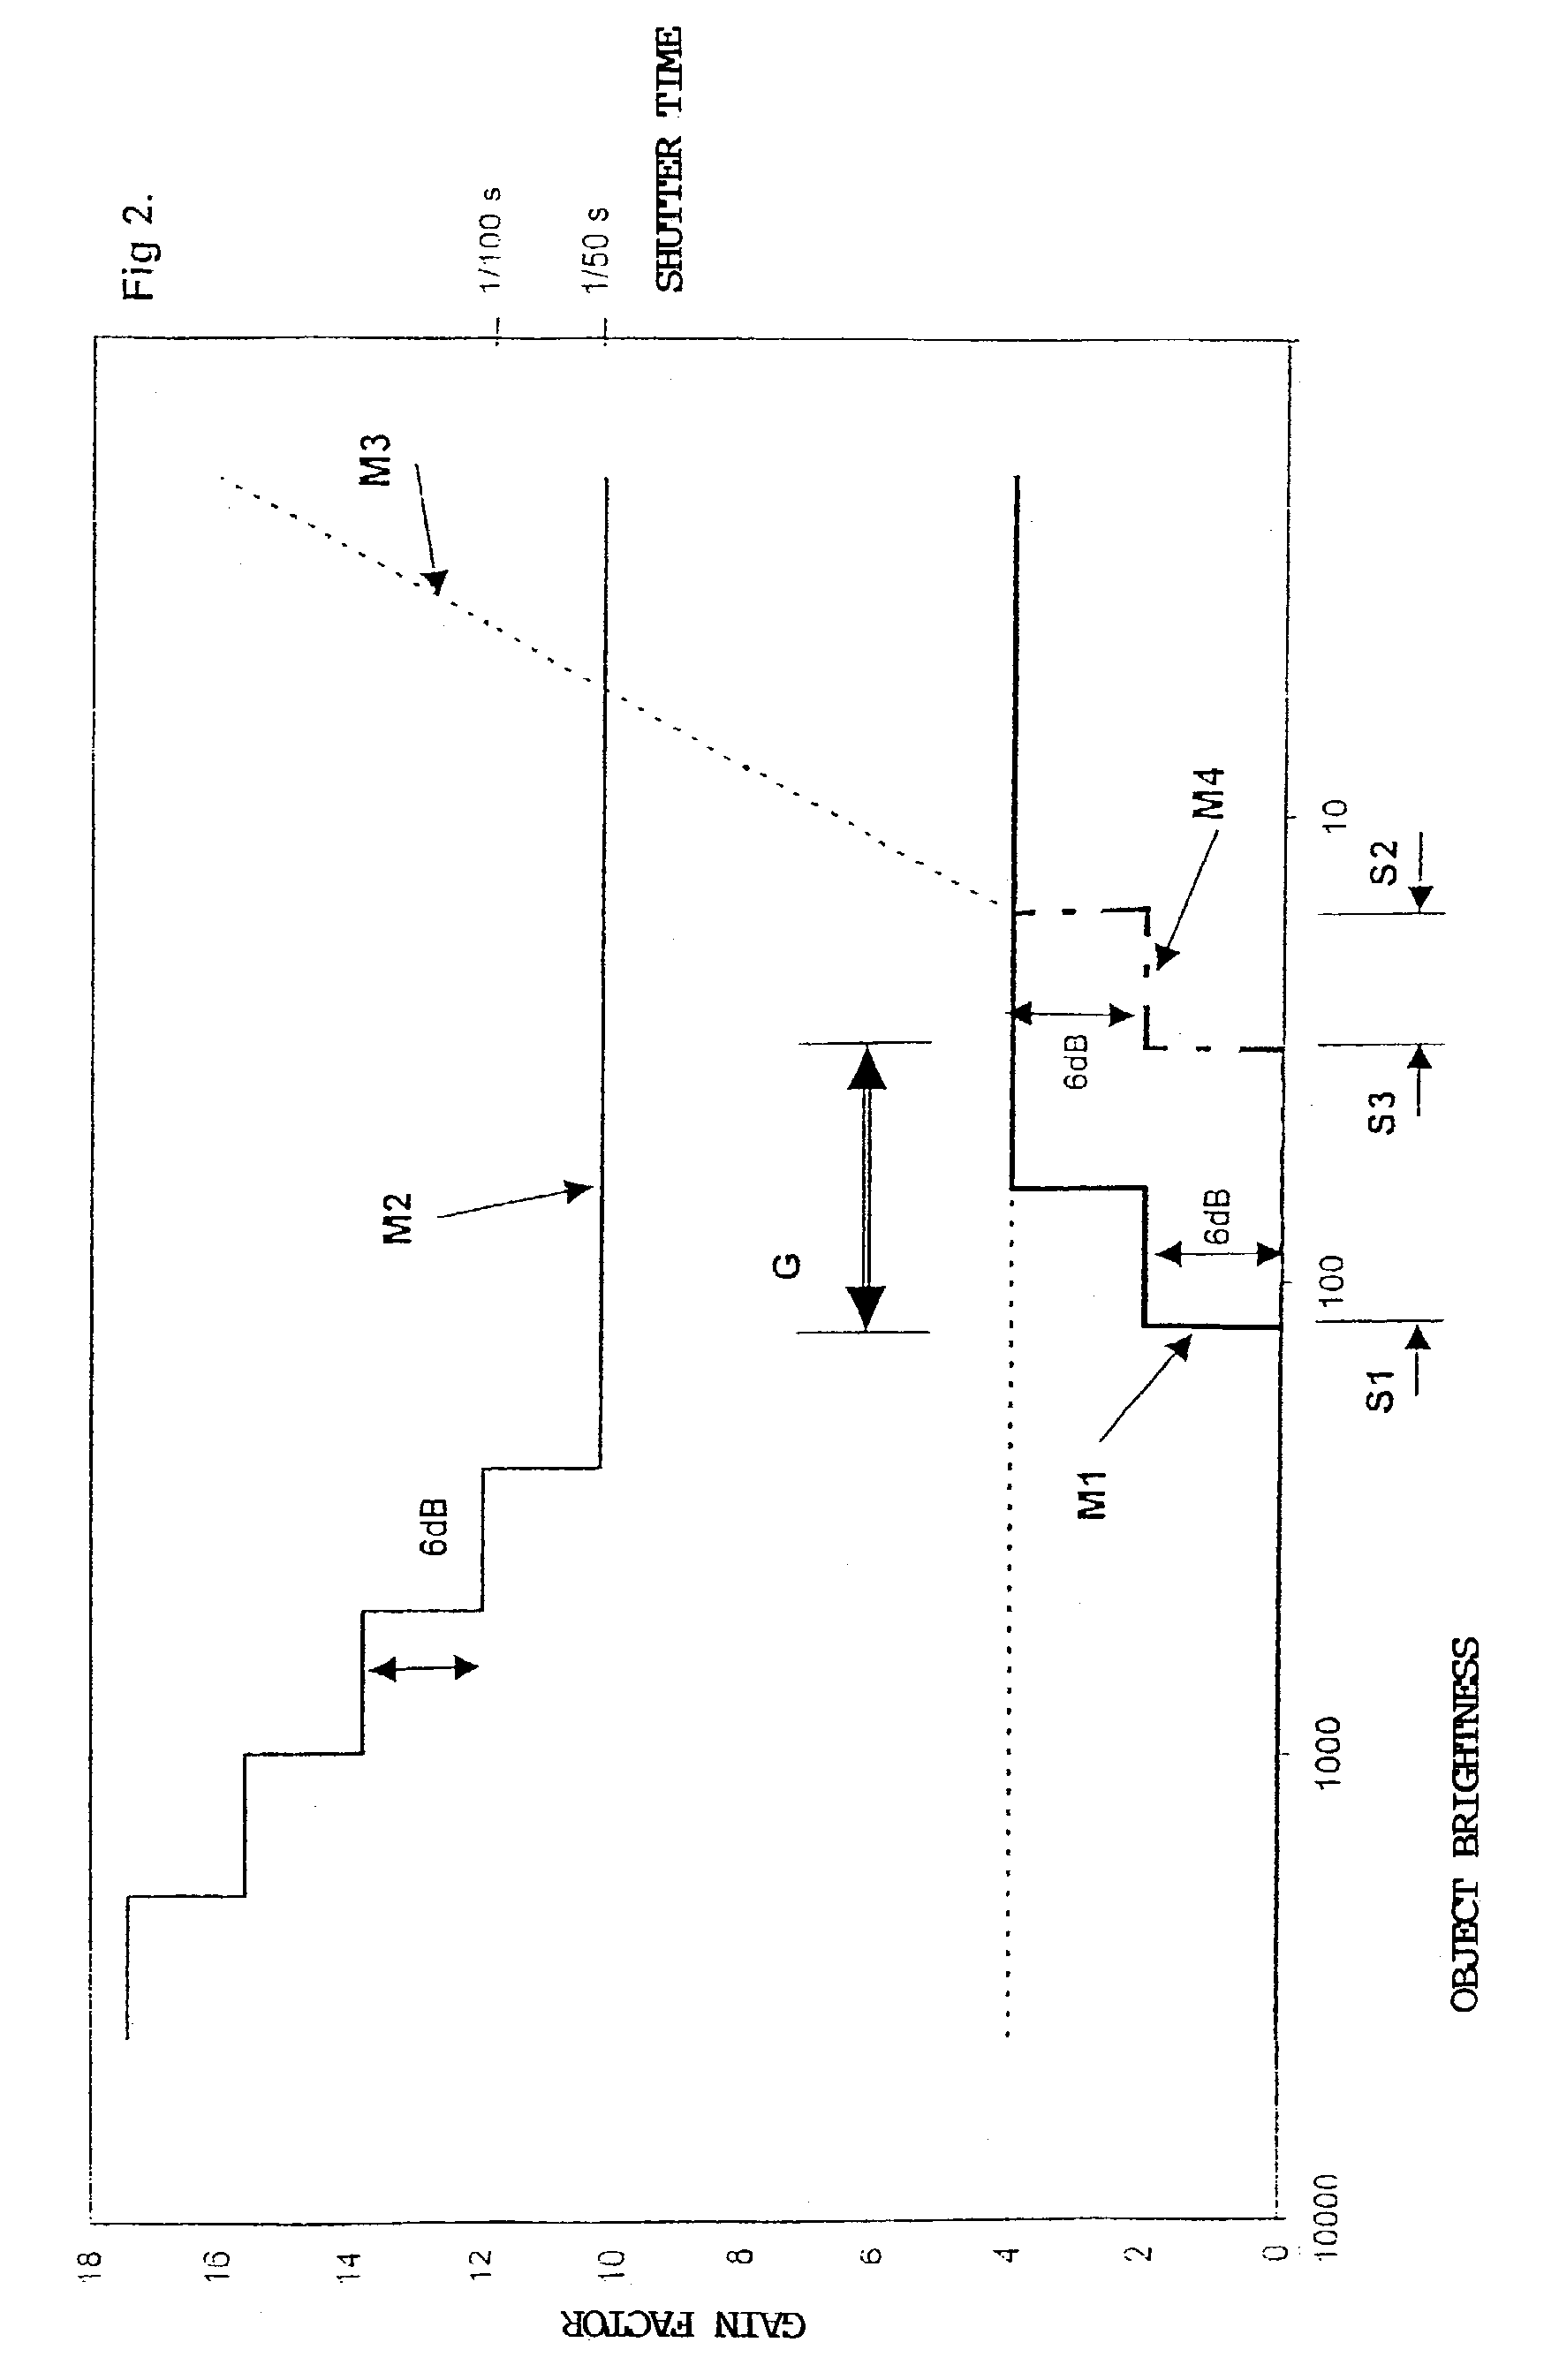 Solid-state video camera and method for brightness control